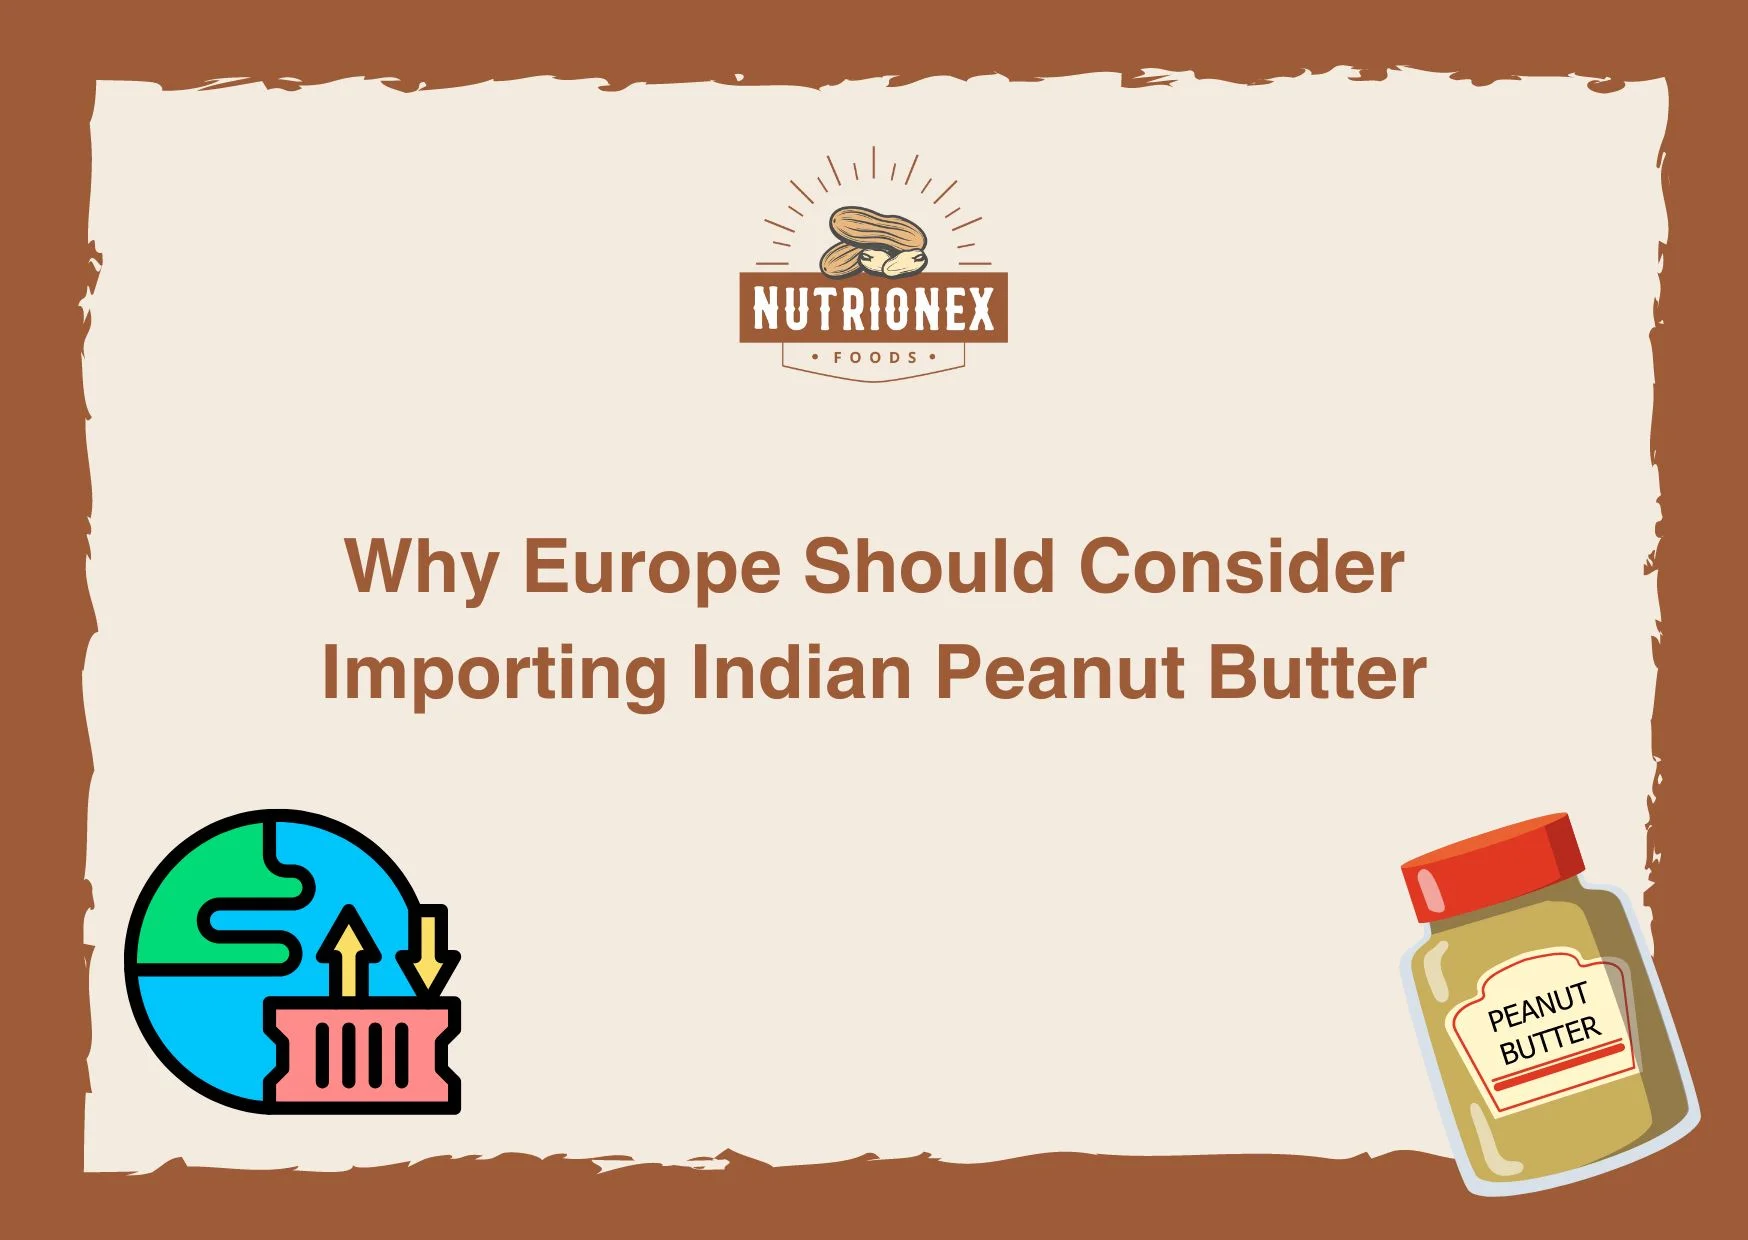 Why Europe Should Consider Importing Indian Peanut Butter